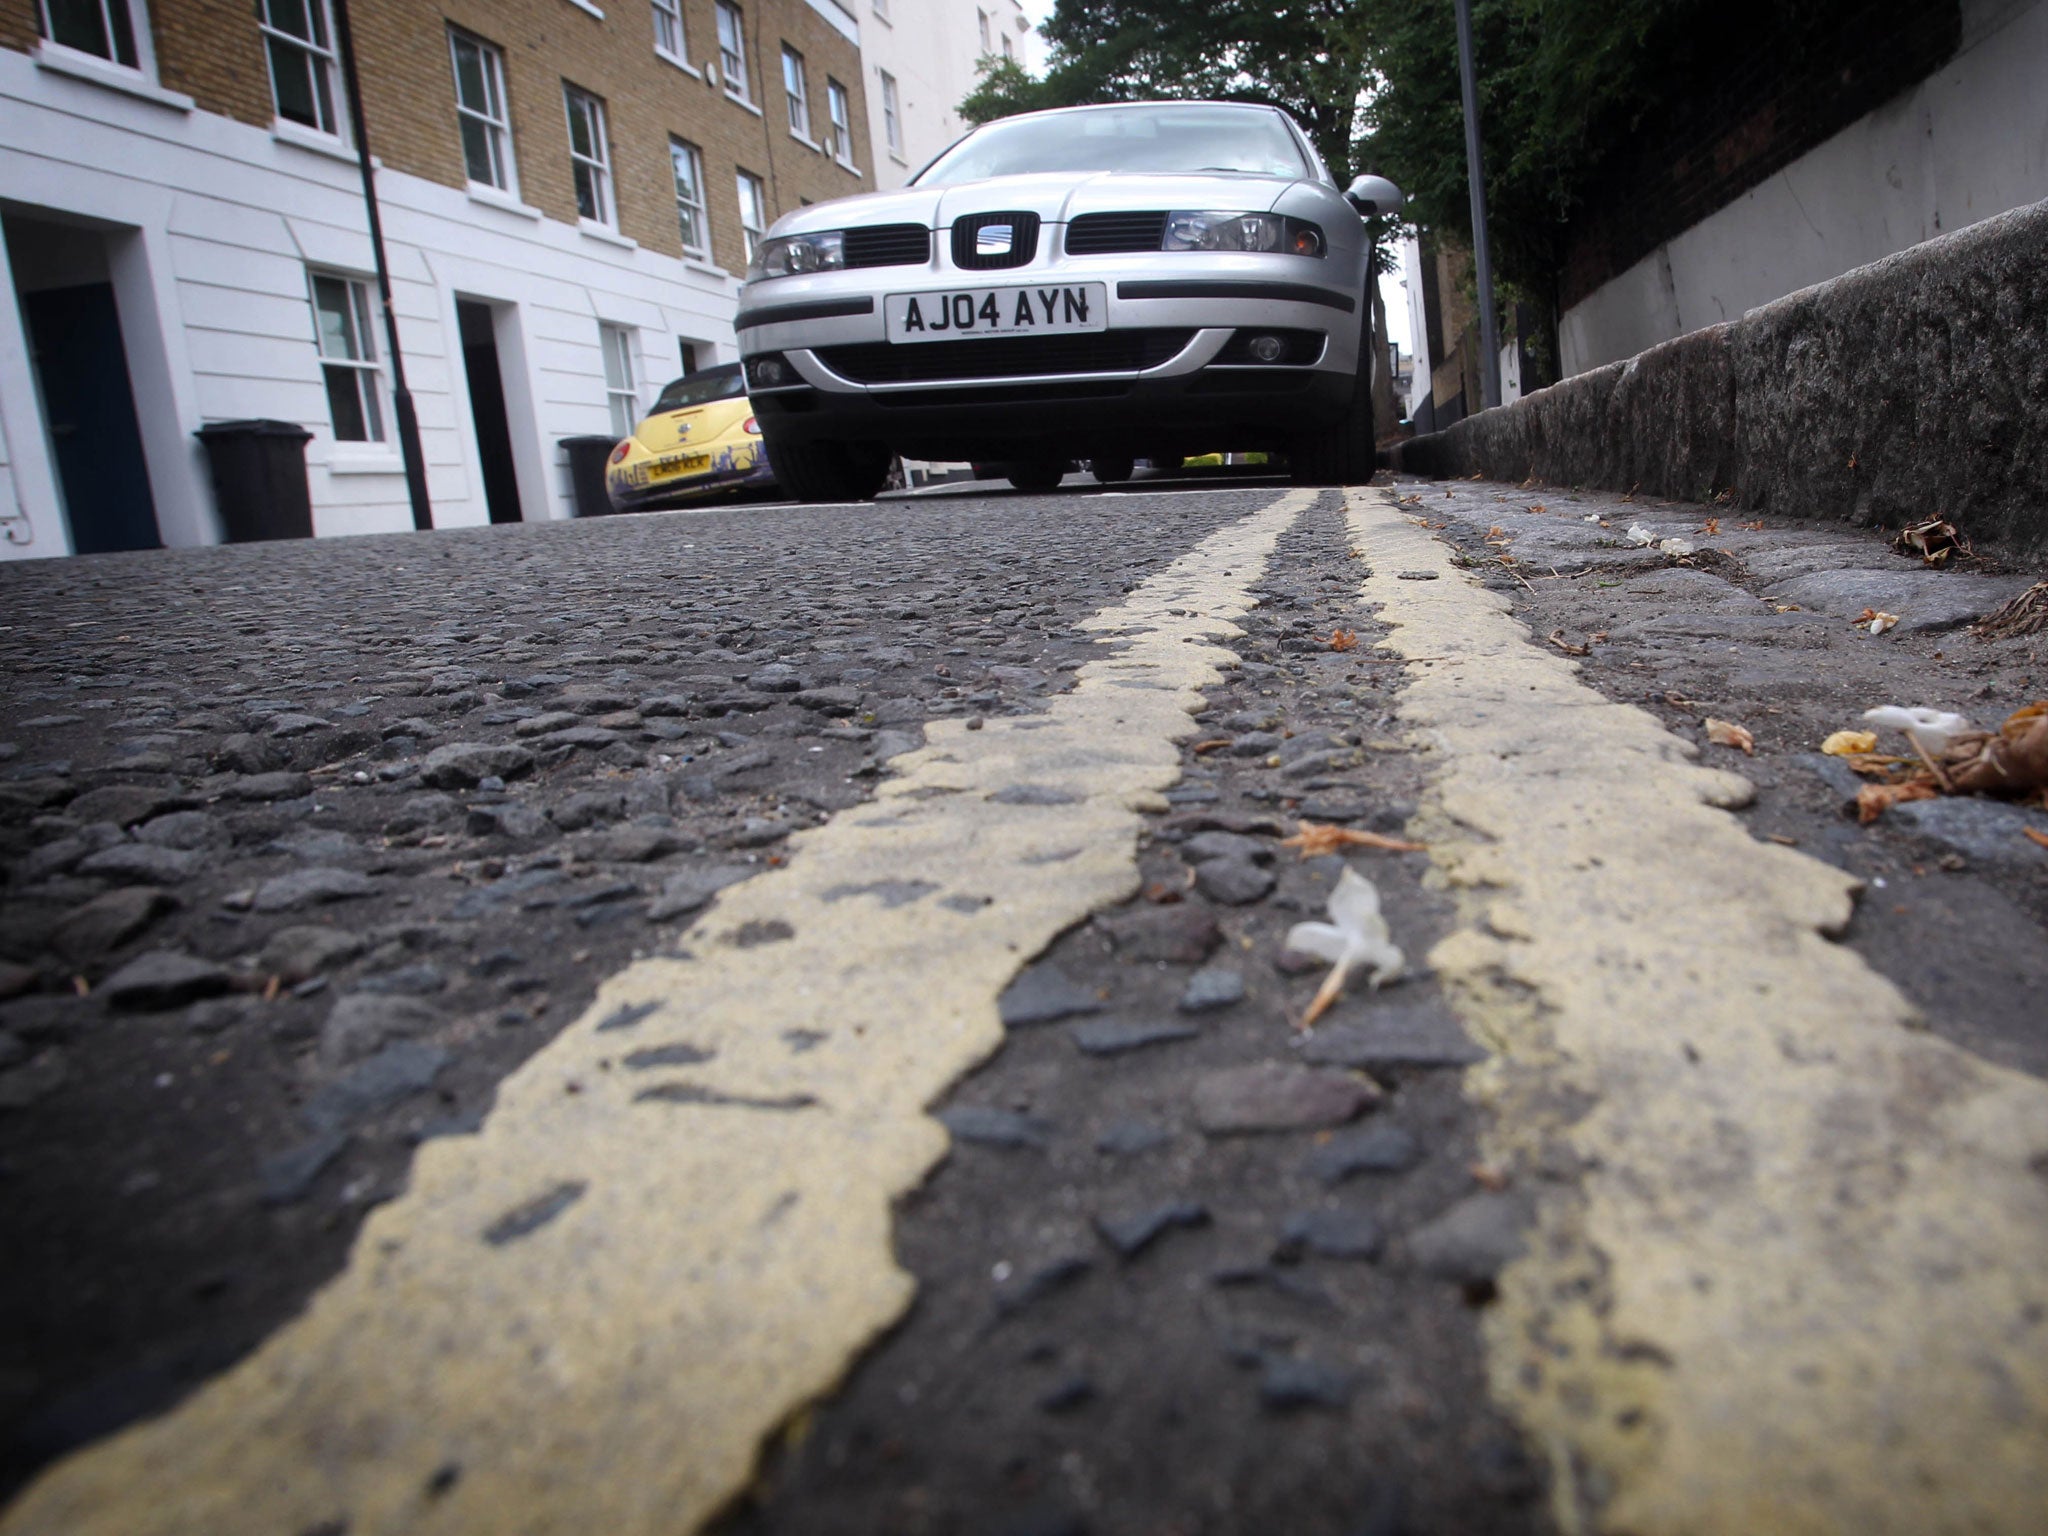 Eliminating double yellow lines is intended to help rejuvenate Britain's high streets